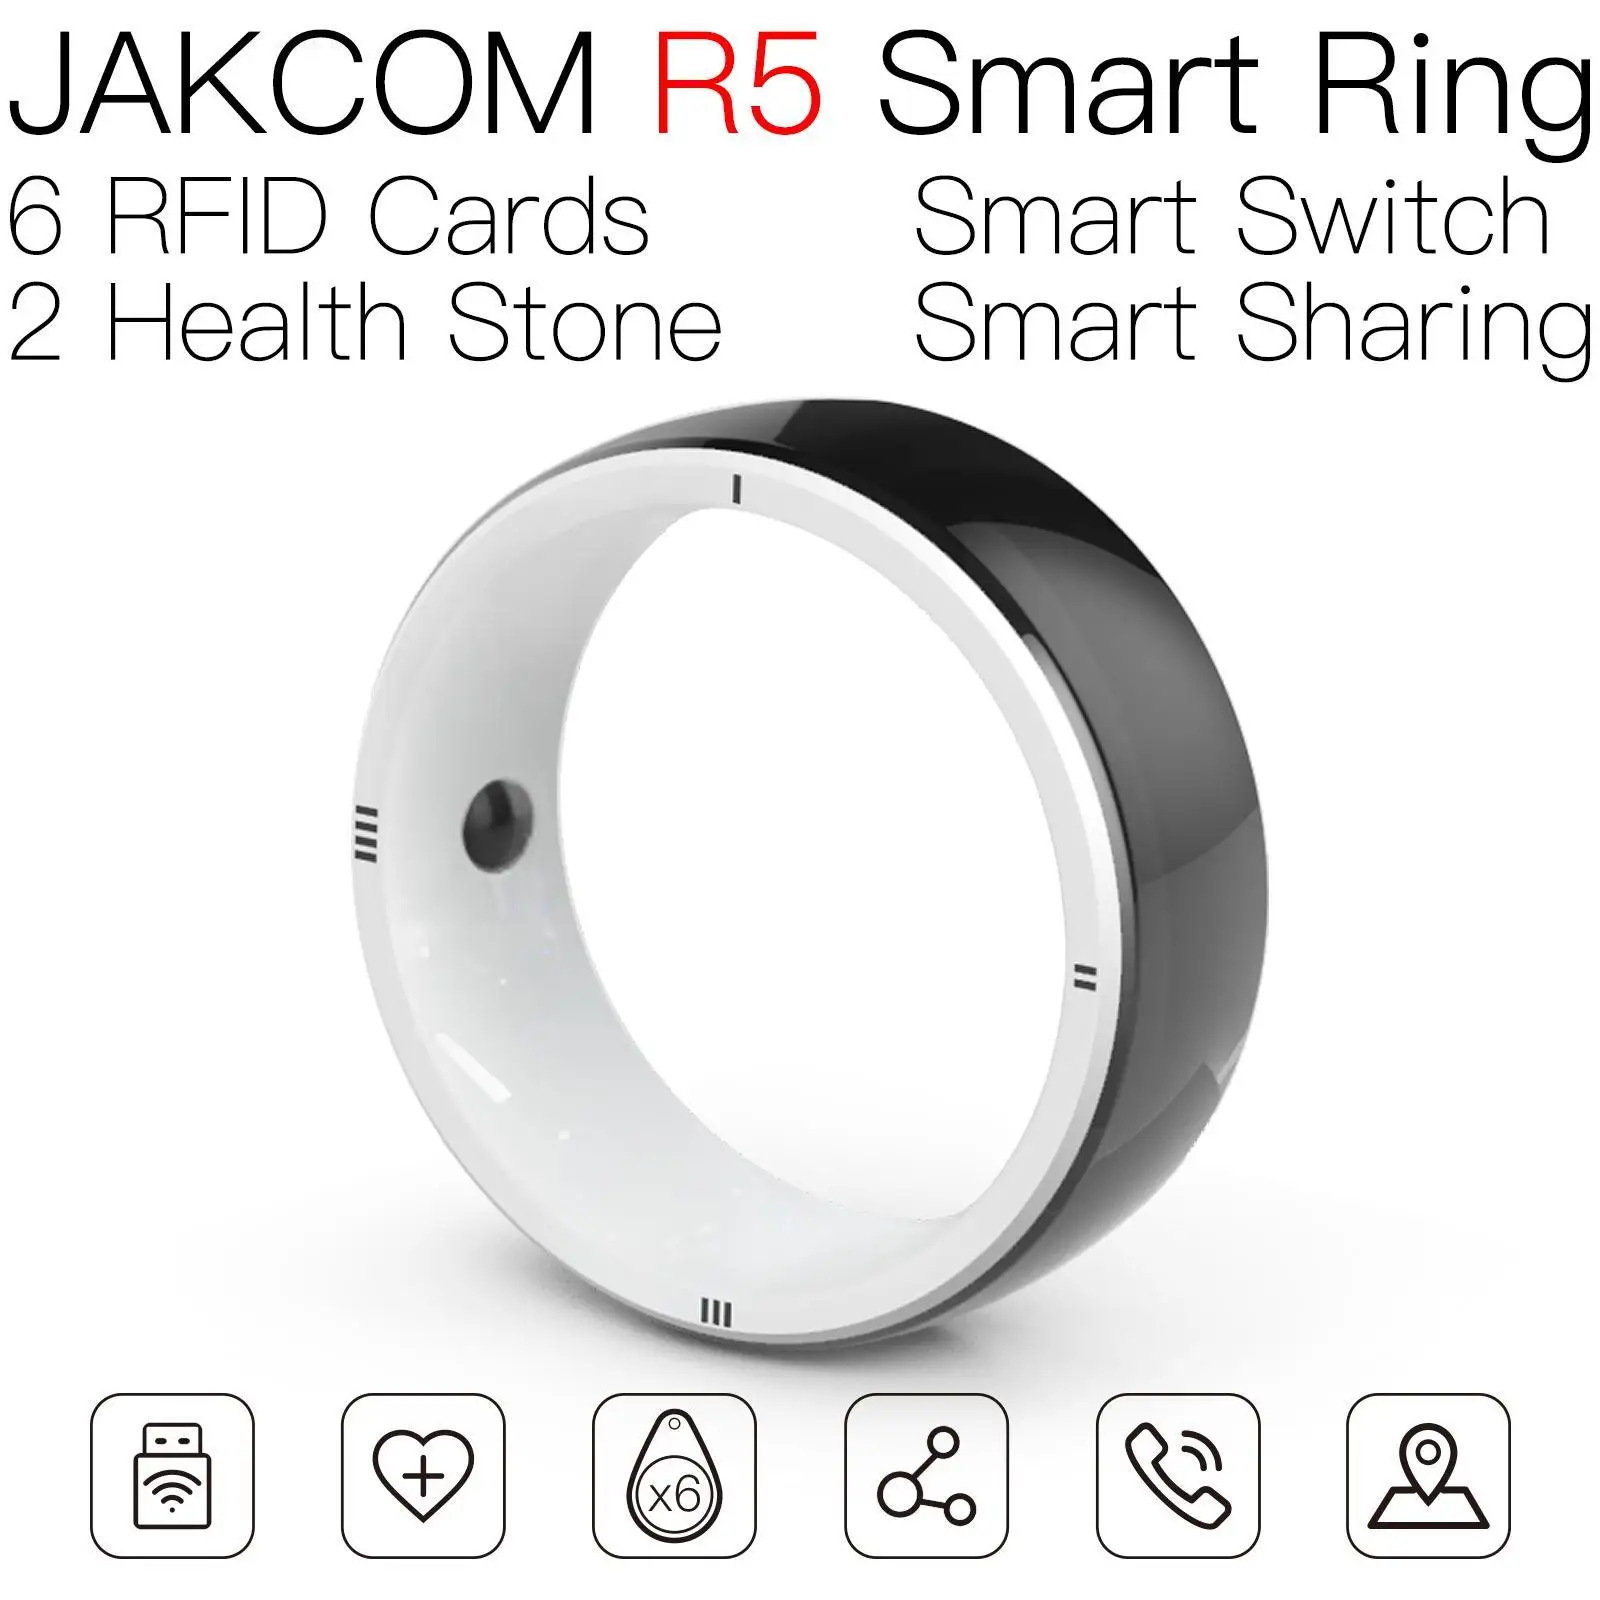 

JAKCOM R5 Smart Ring Newer than access control cardboard nfc card chip implant tag rfid cow truck read and write smart watch 5